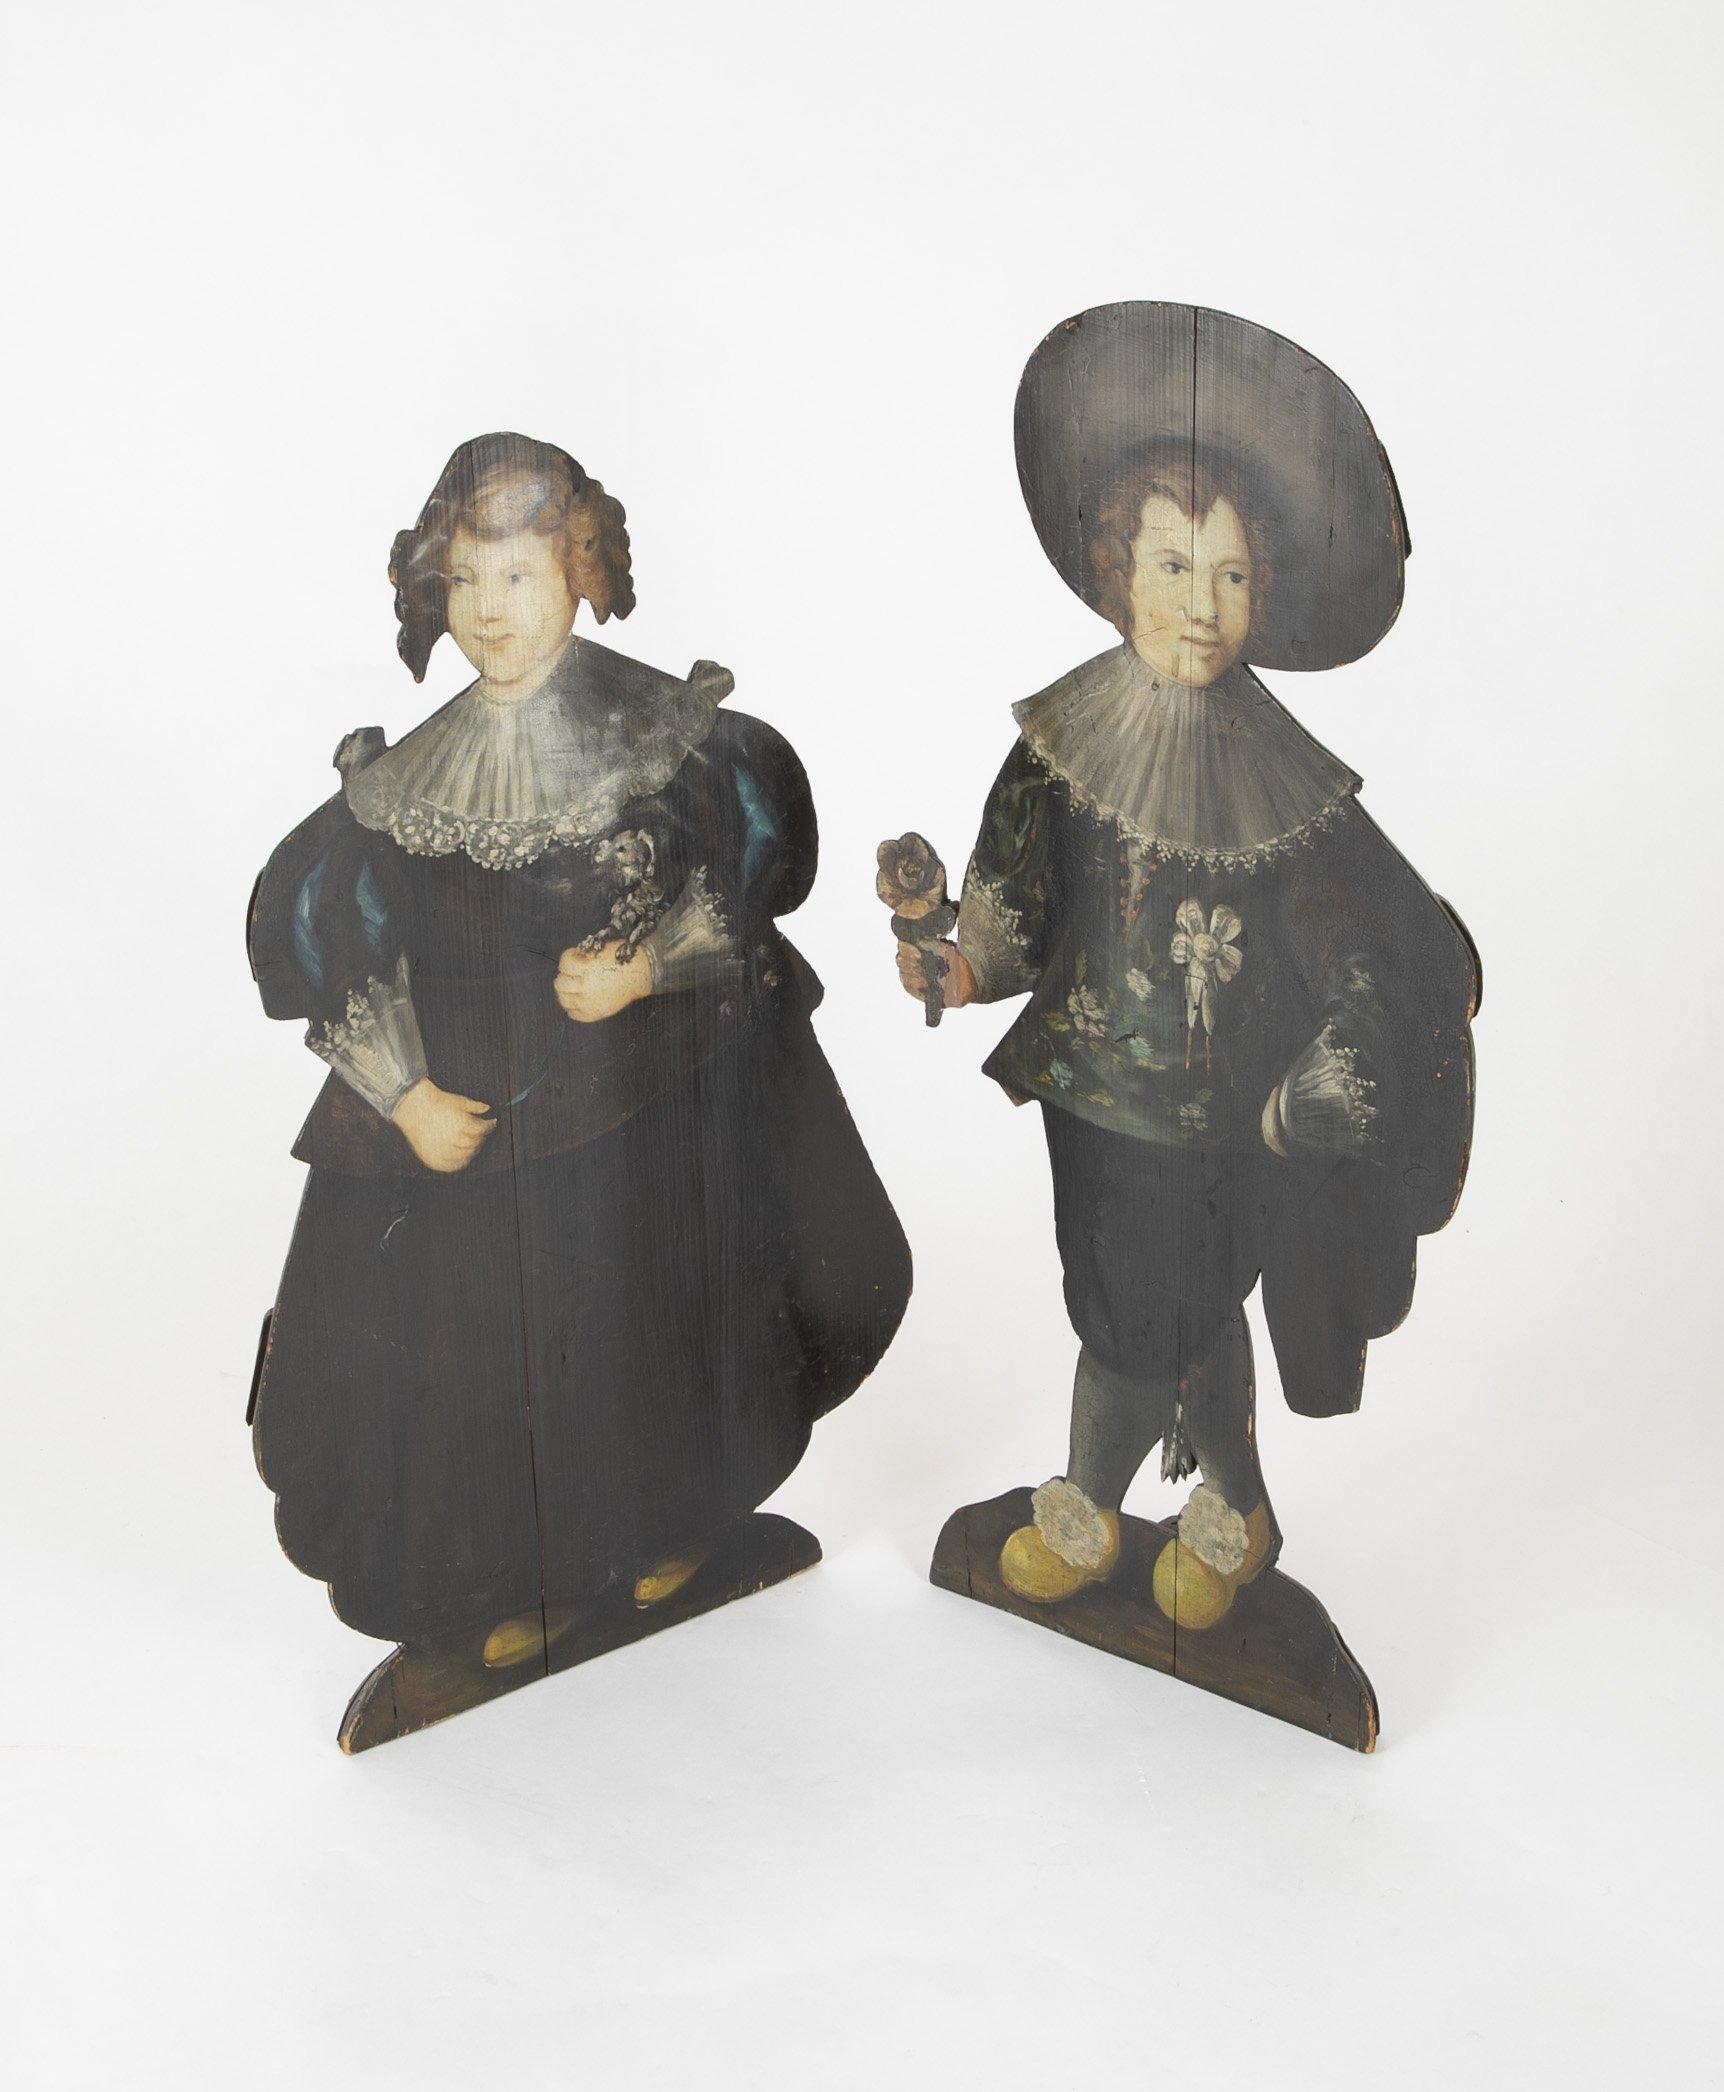 Pair of English painted Dummy boards in the form of a young boy and a young girl, early to mid-19th century.